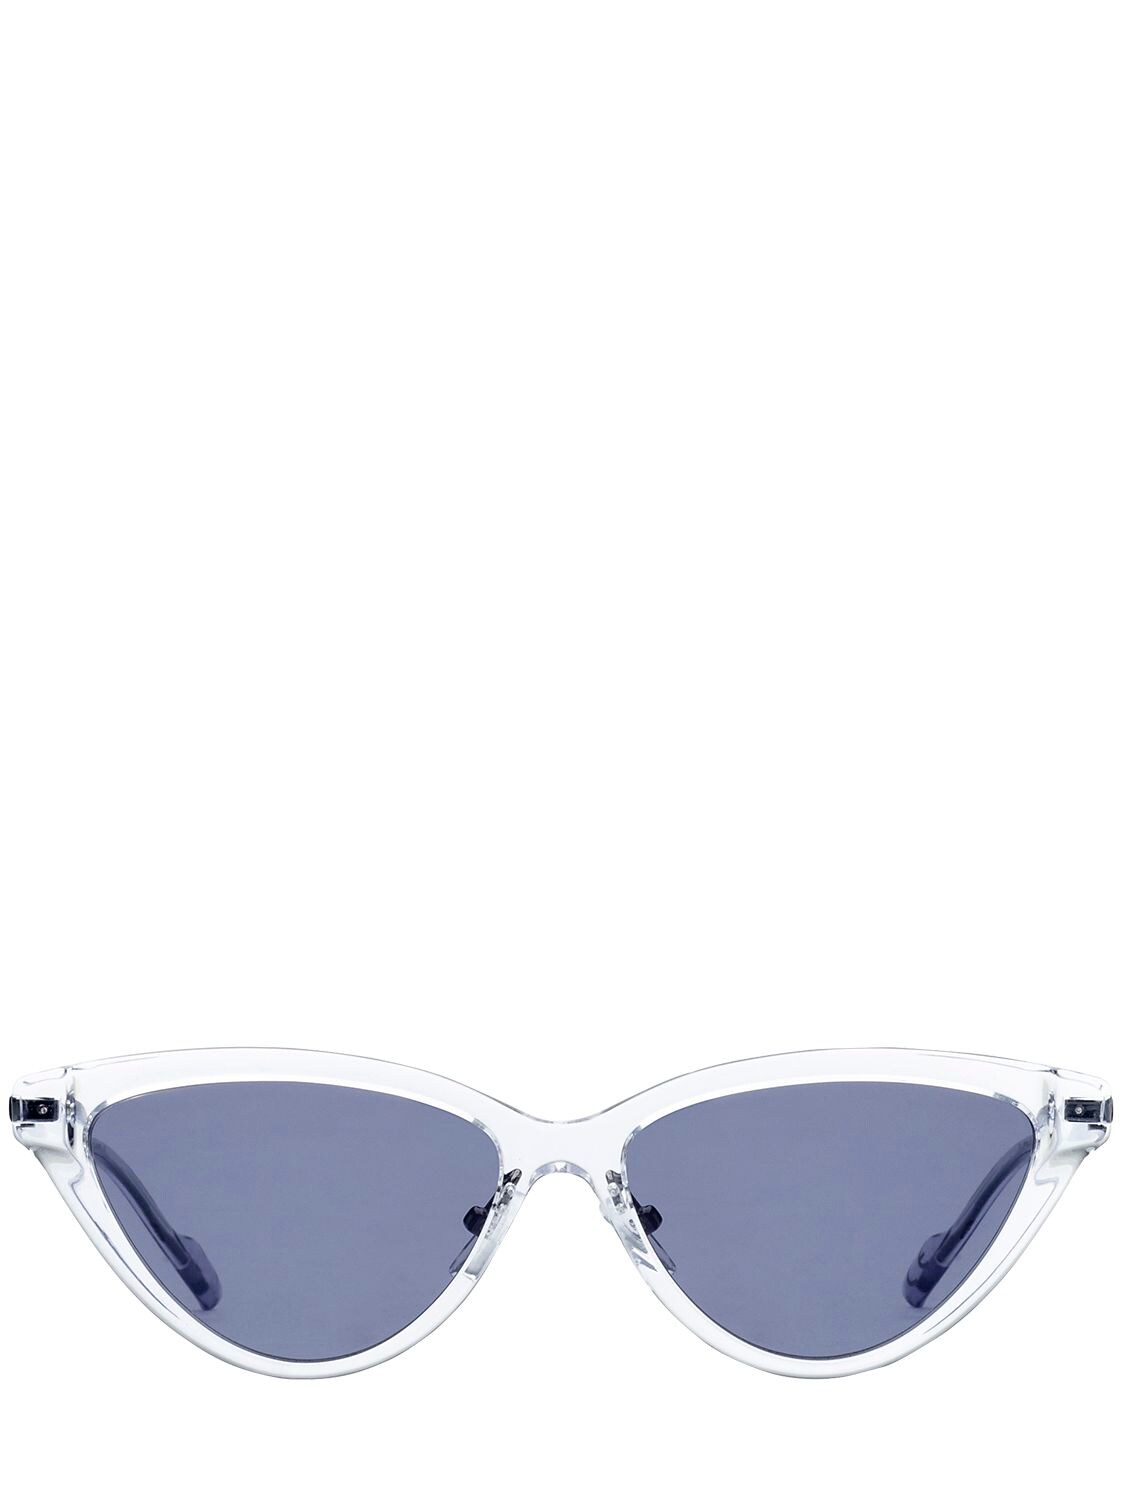 Adidas Originals By Italia Independent Acetate Cat-eye Sunglasses In Crystal